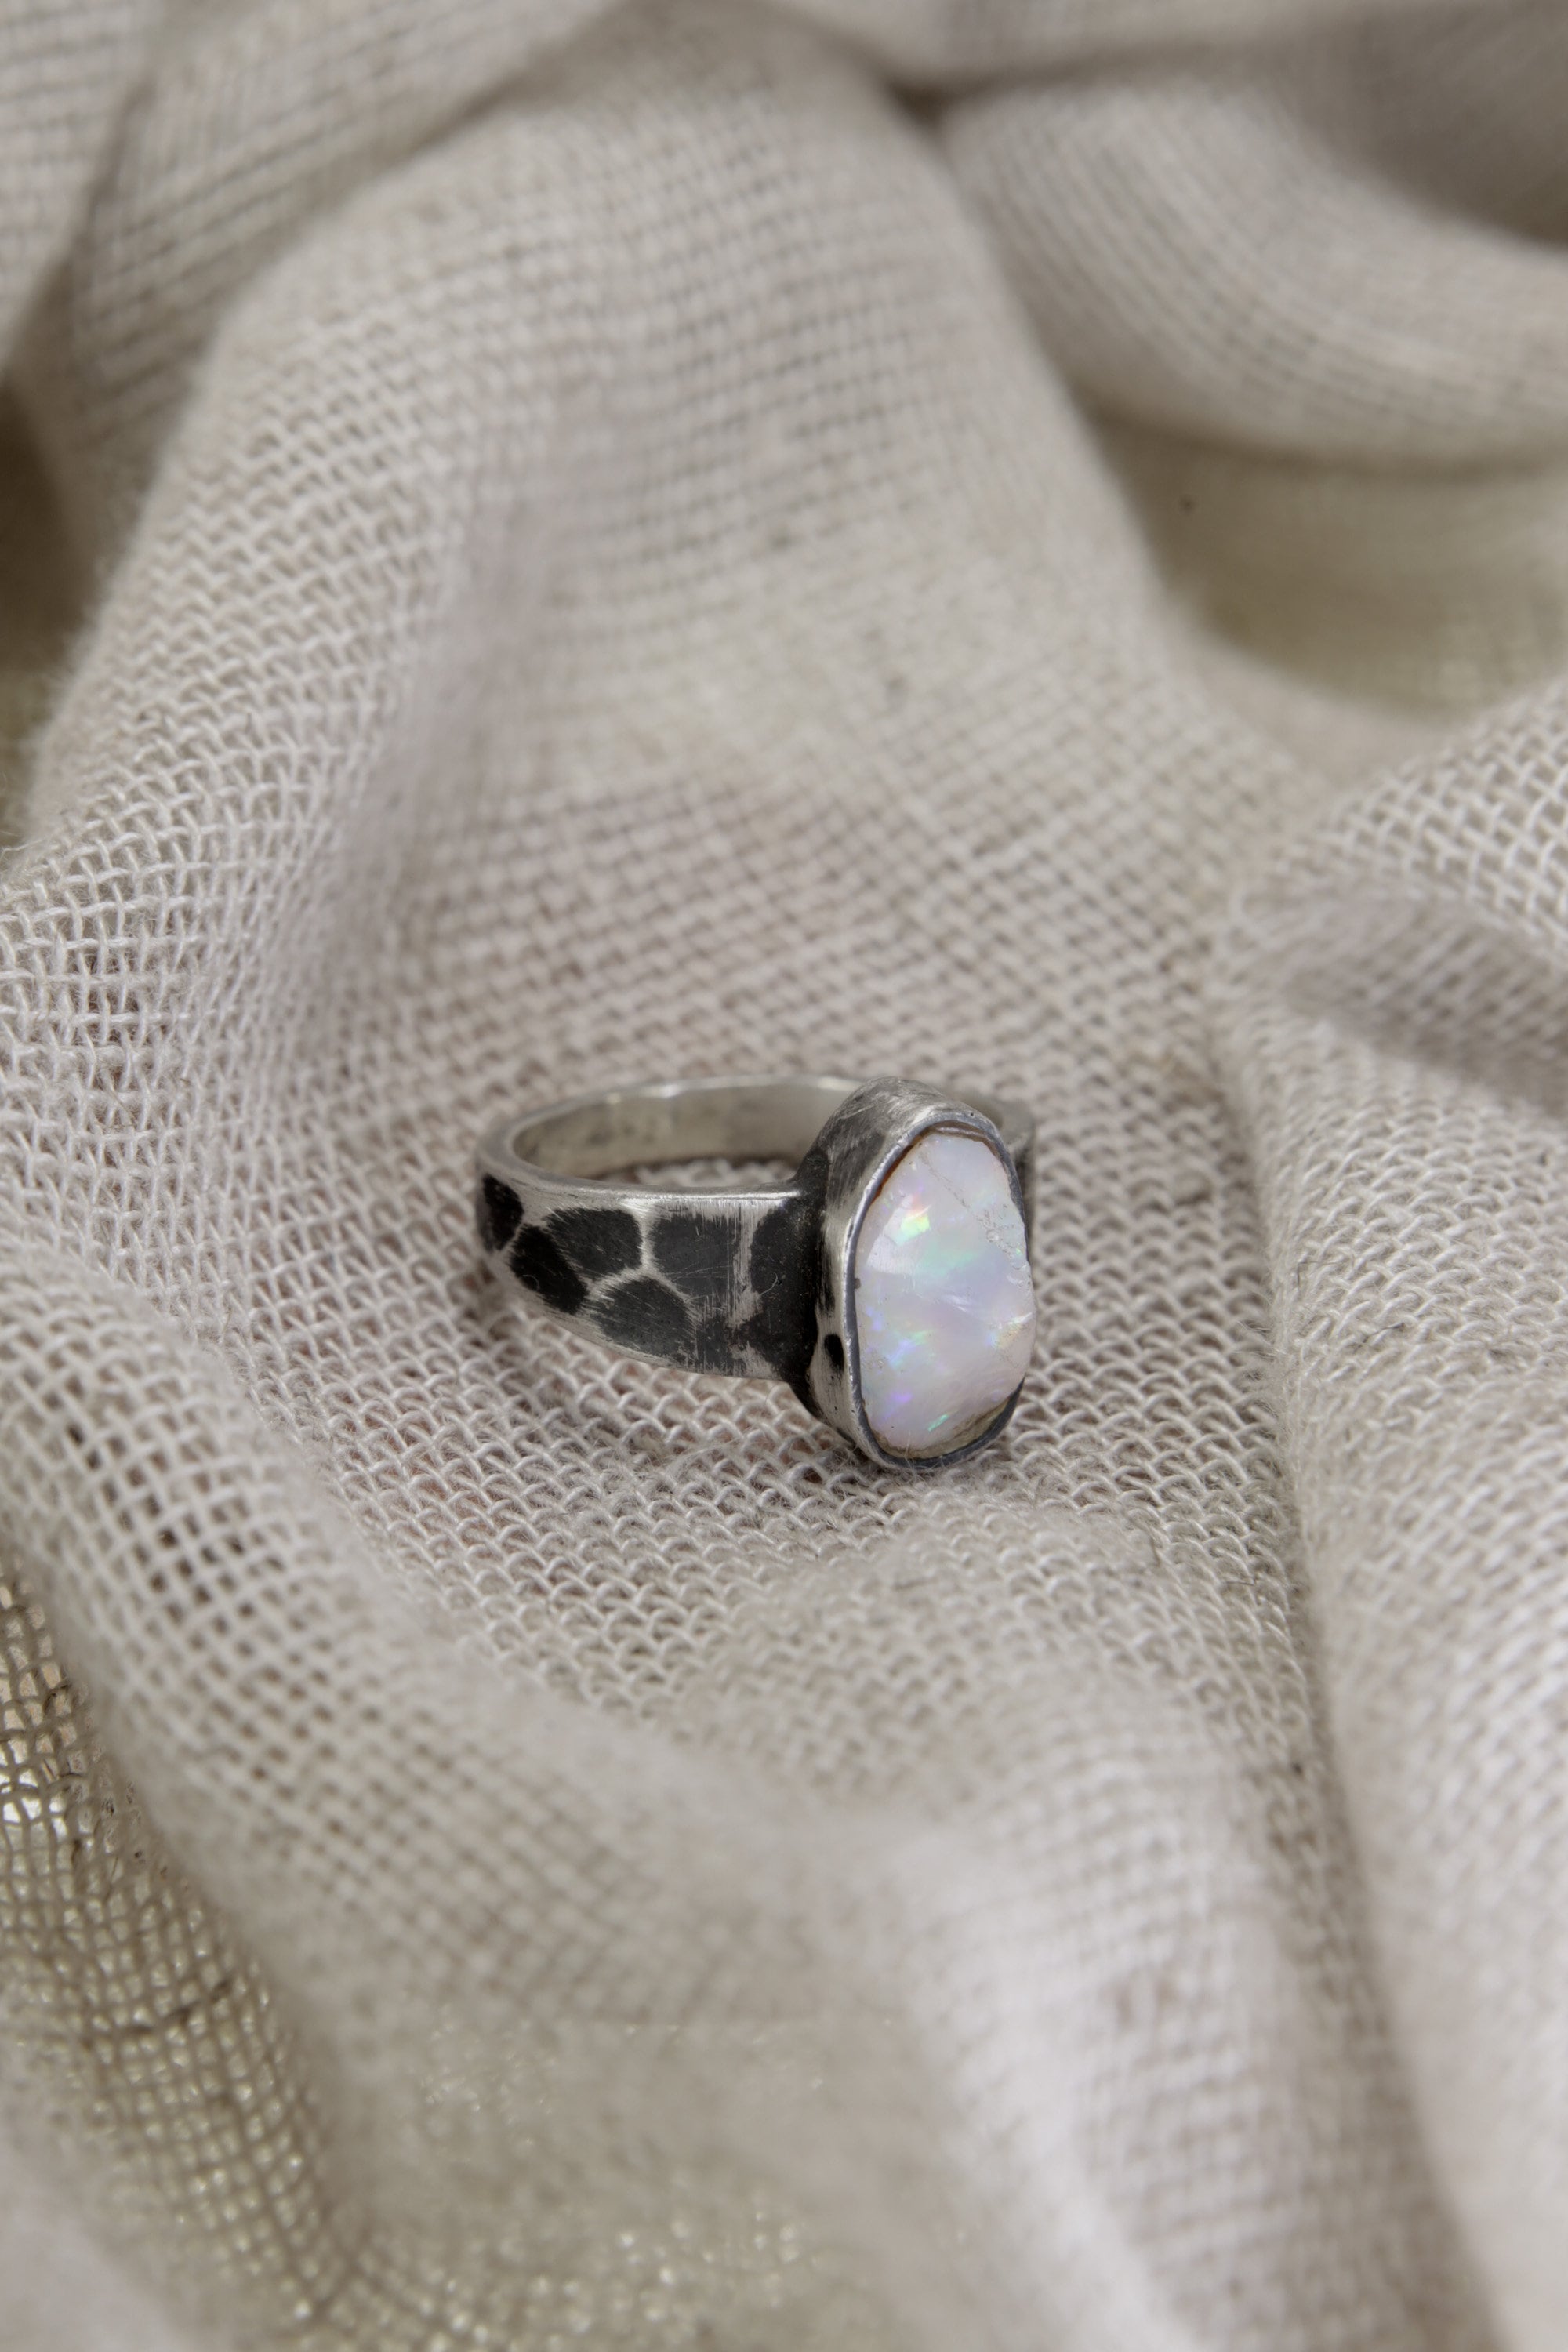 Enchanted Spectrum: Sterling Silver Ring with Australian Lightning Ridge Gem Opal - Textured & Oxidised - Size 7 - NO/02